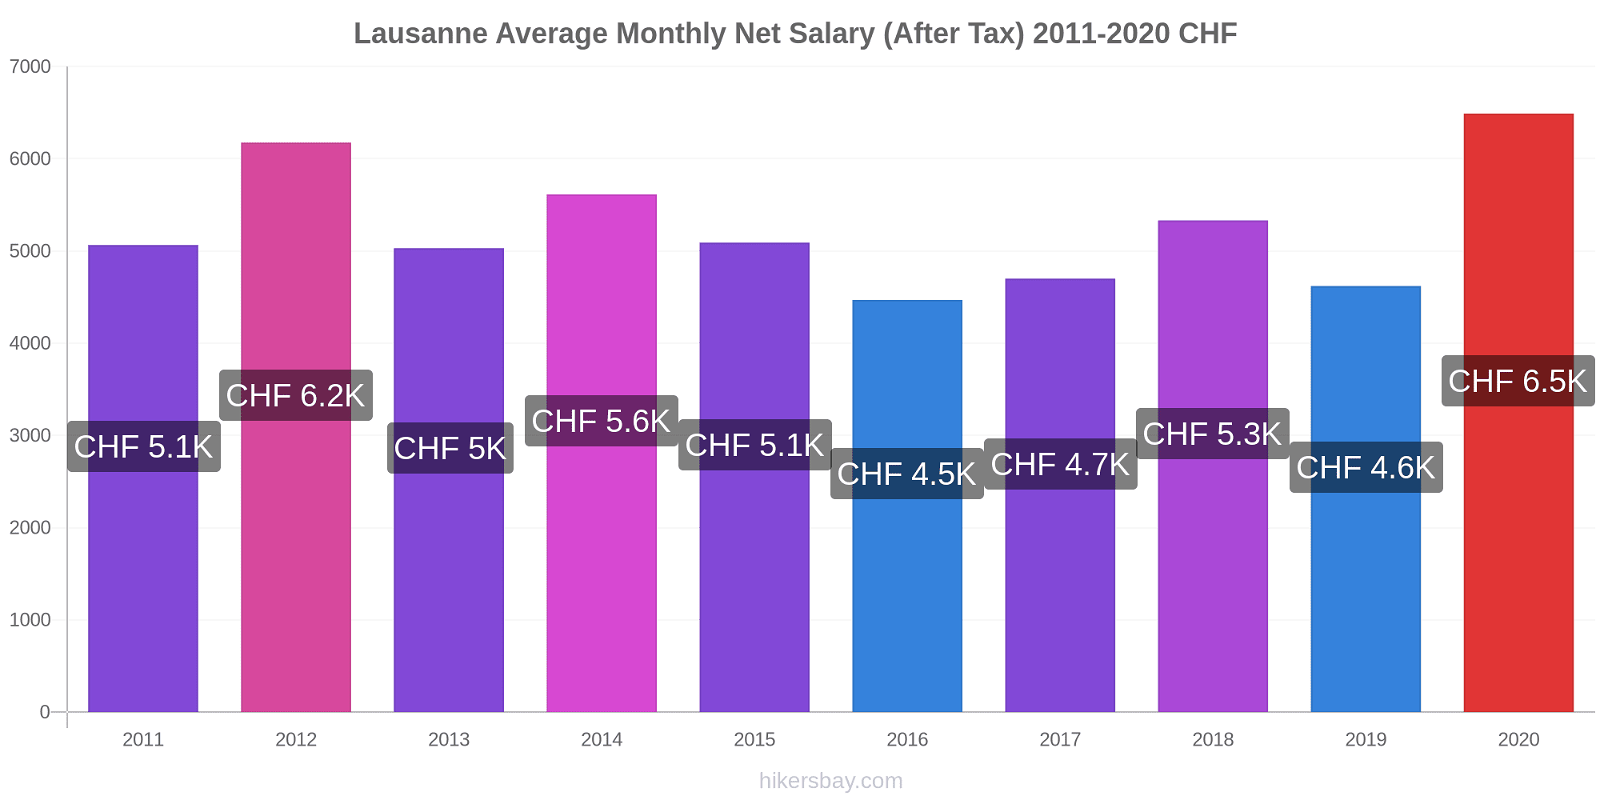 Lausanne price changes Average Monthly Net Salary (After Tax) hikersbay.com